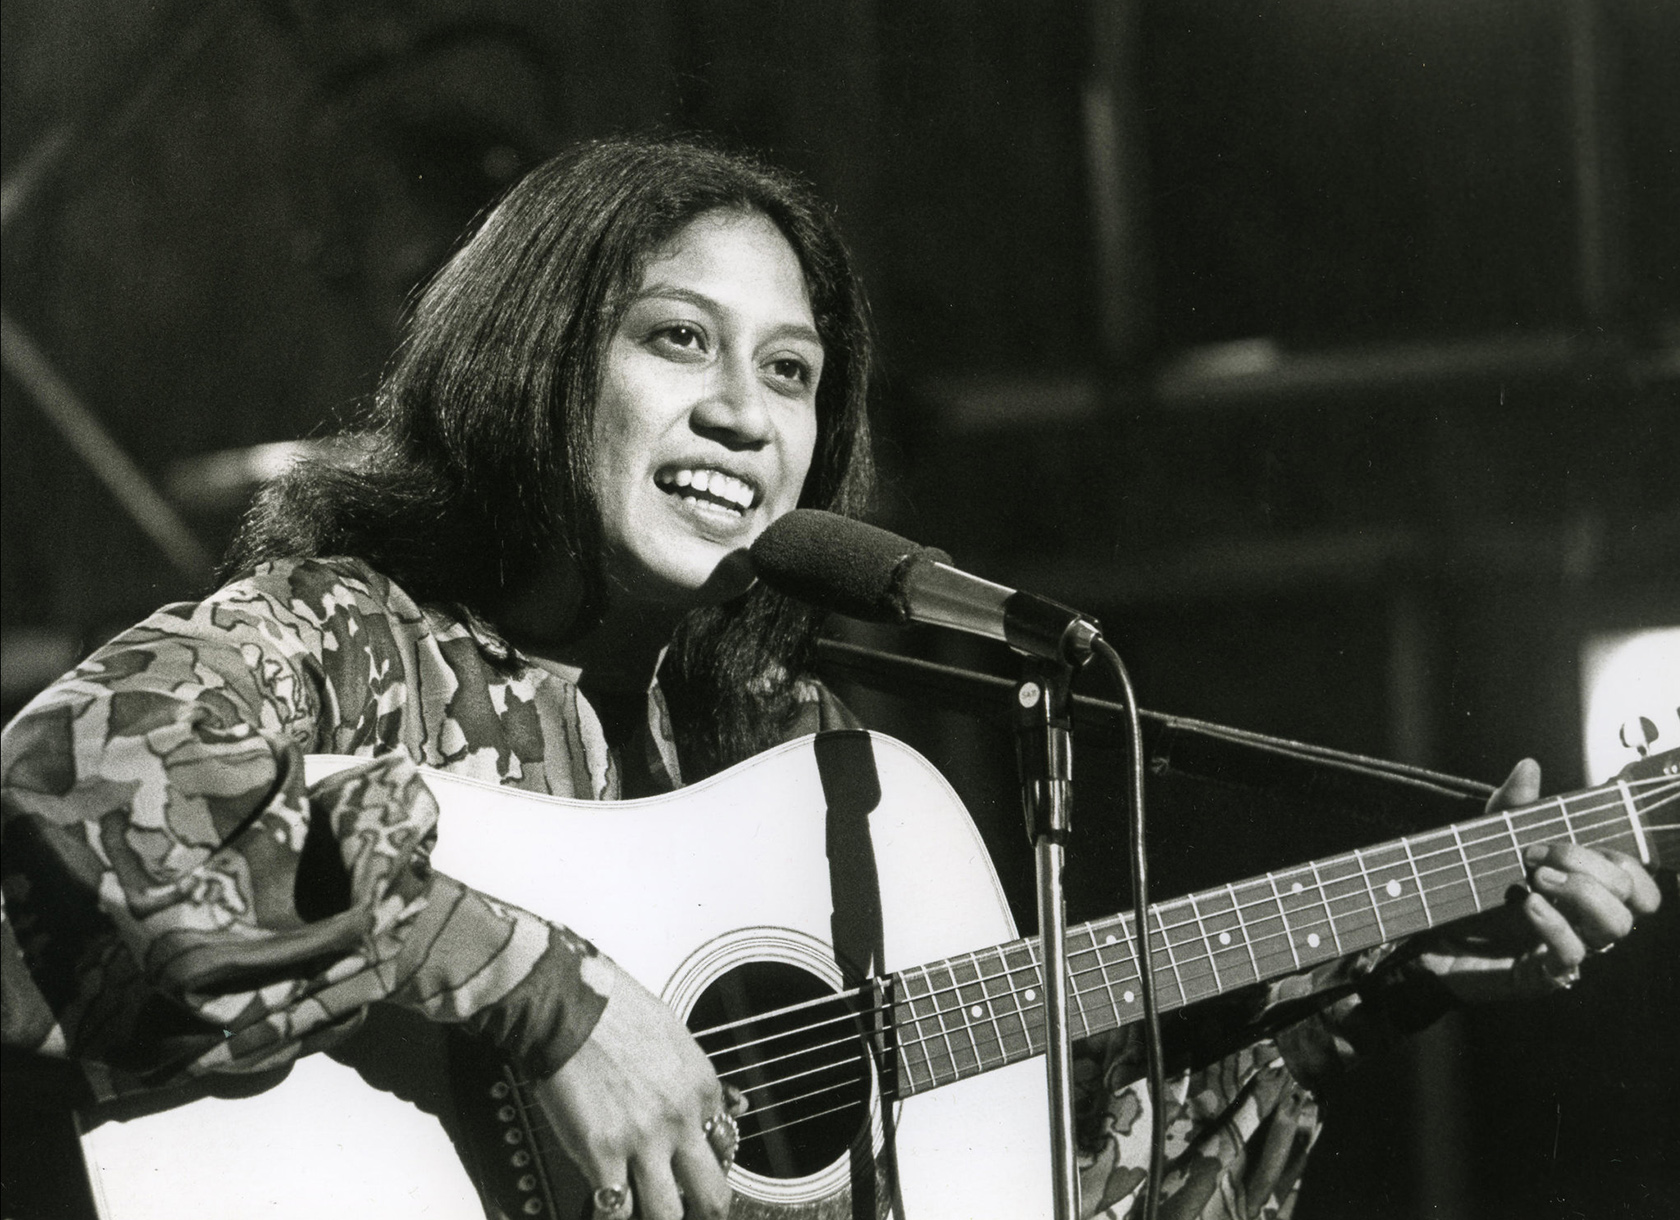 A black and white photo of a woman playing a guitar and singing into a microphone.